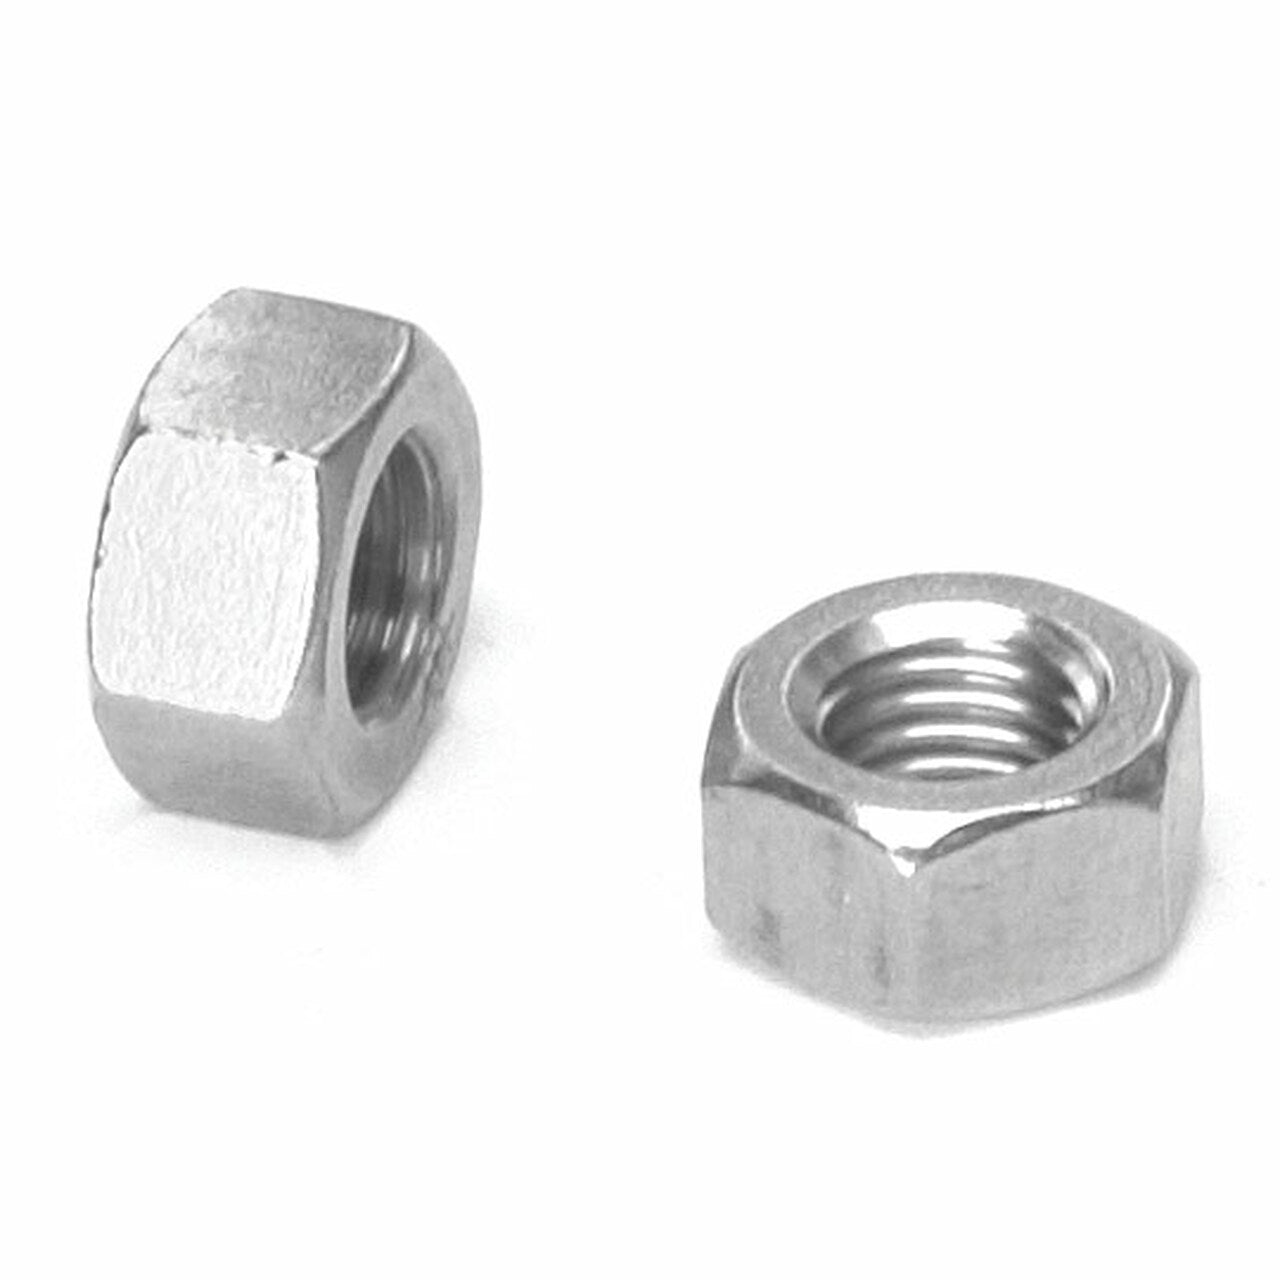 Standard Fasteners - 304 Stainless Steel Nuts, Part No. 5/16-18